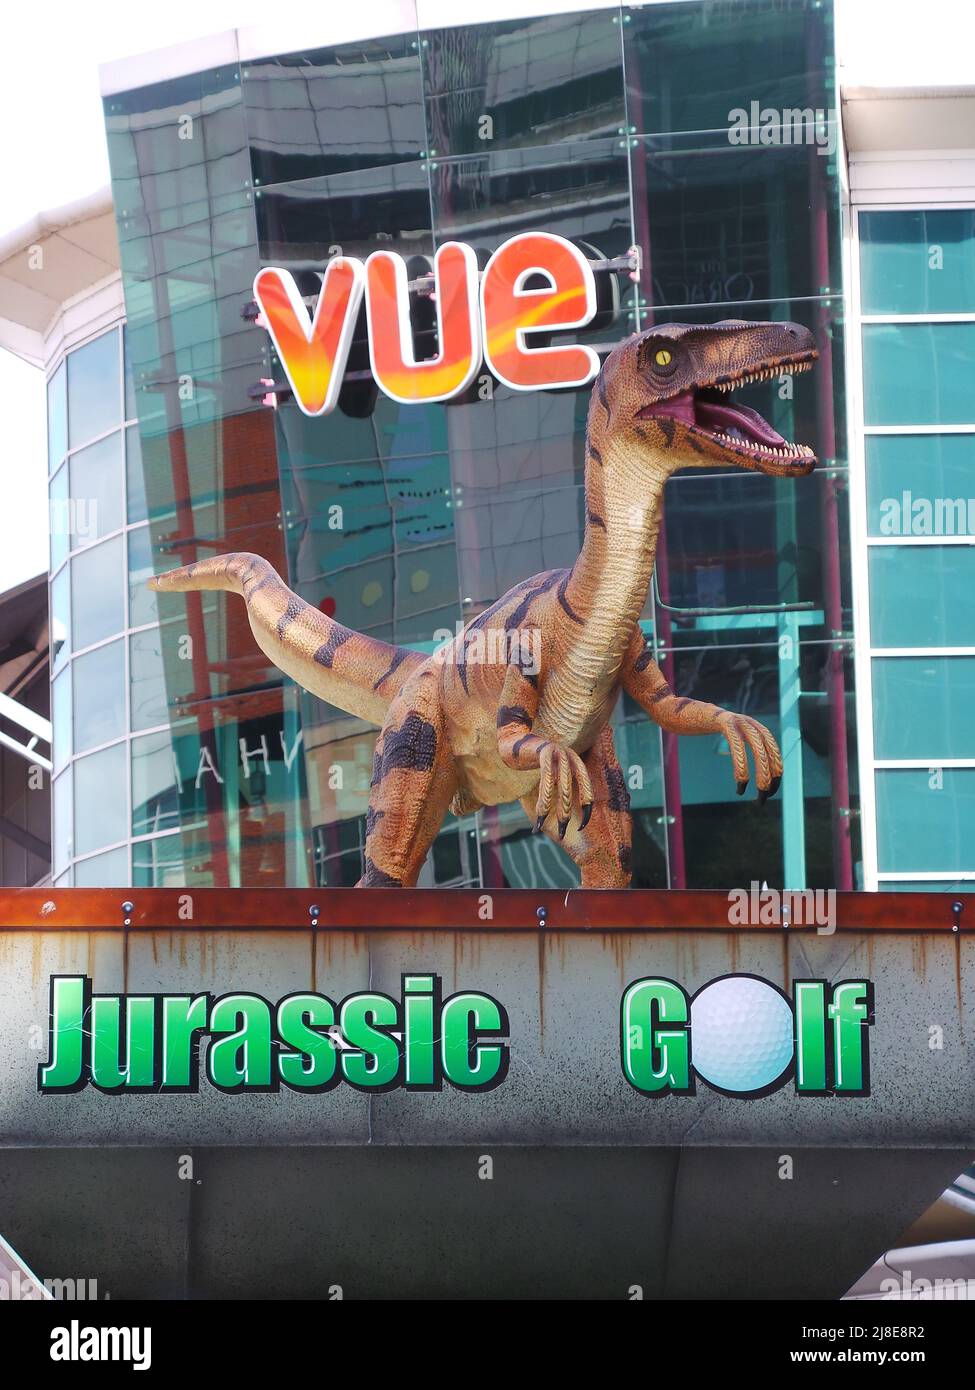 Reading, United Kingdom - April 11 2014:  The entrance to the Jurassic crazy golf course, topped by a model velociraptor, outside Vue Cinema on Rivers Stock Photo